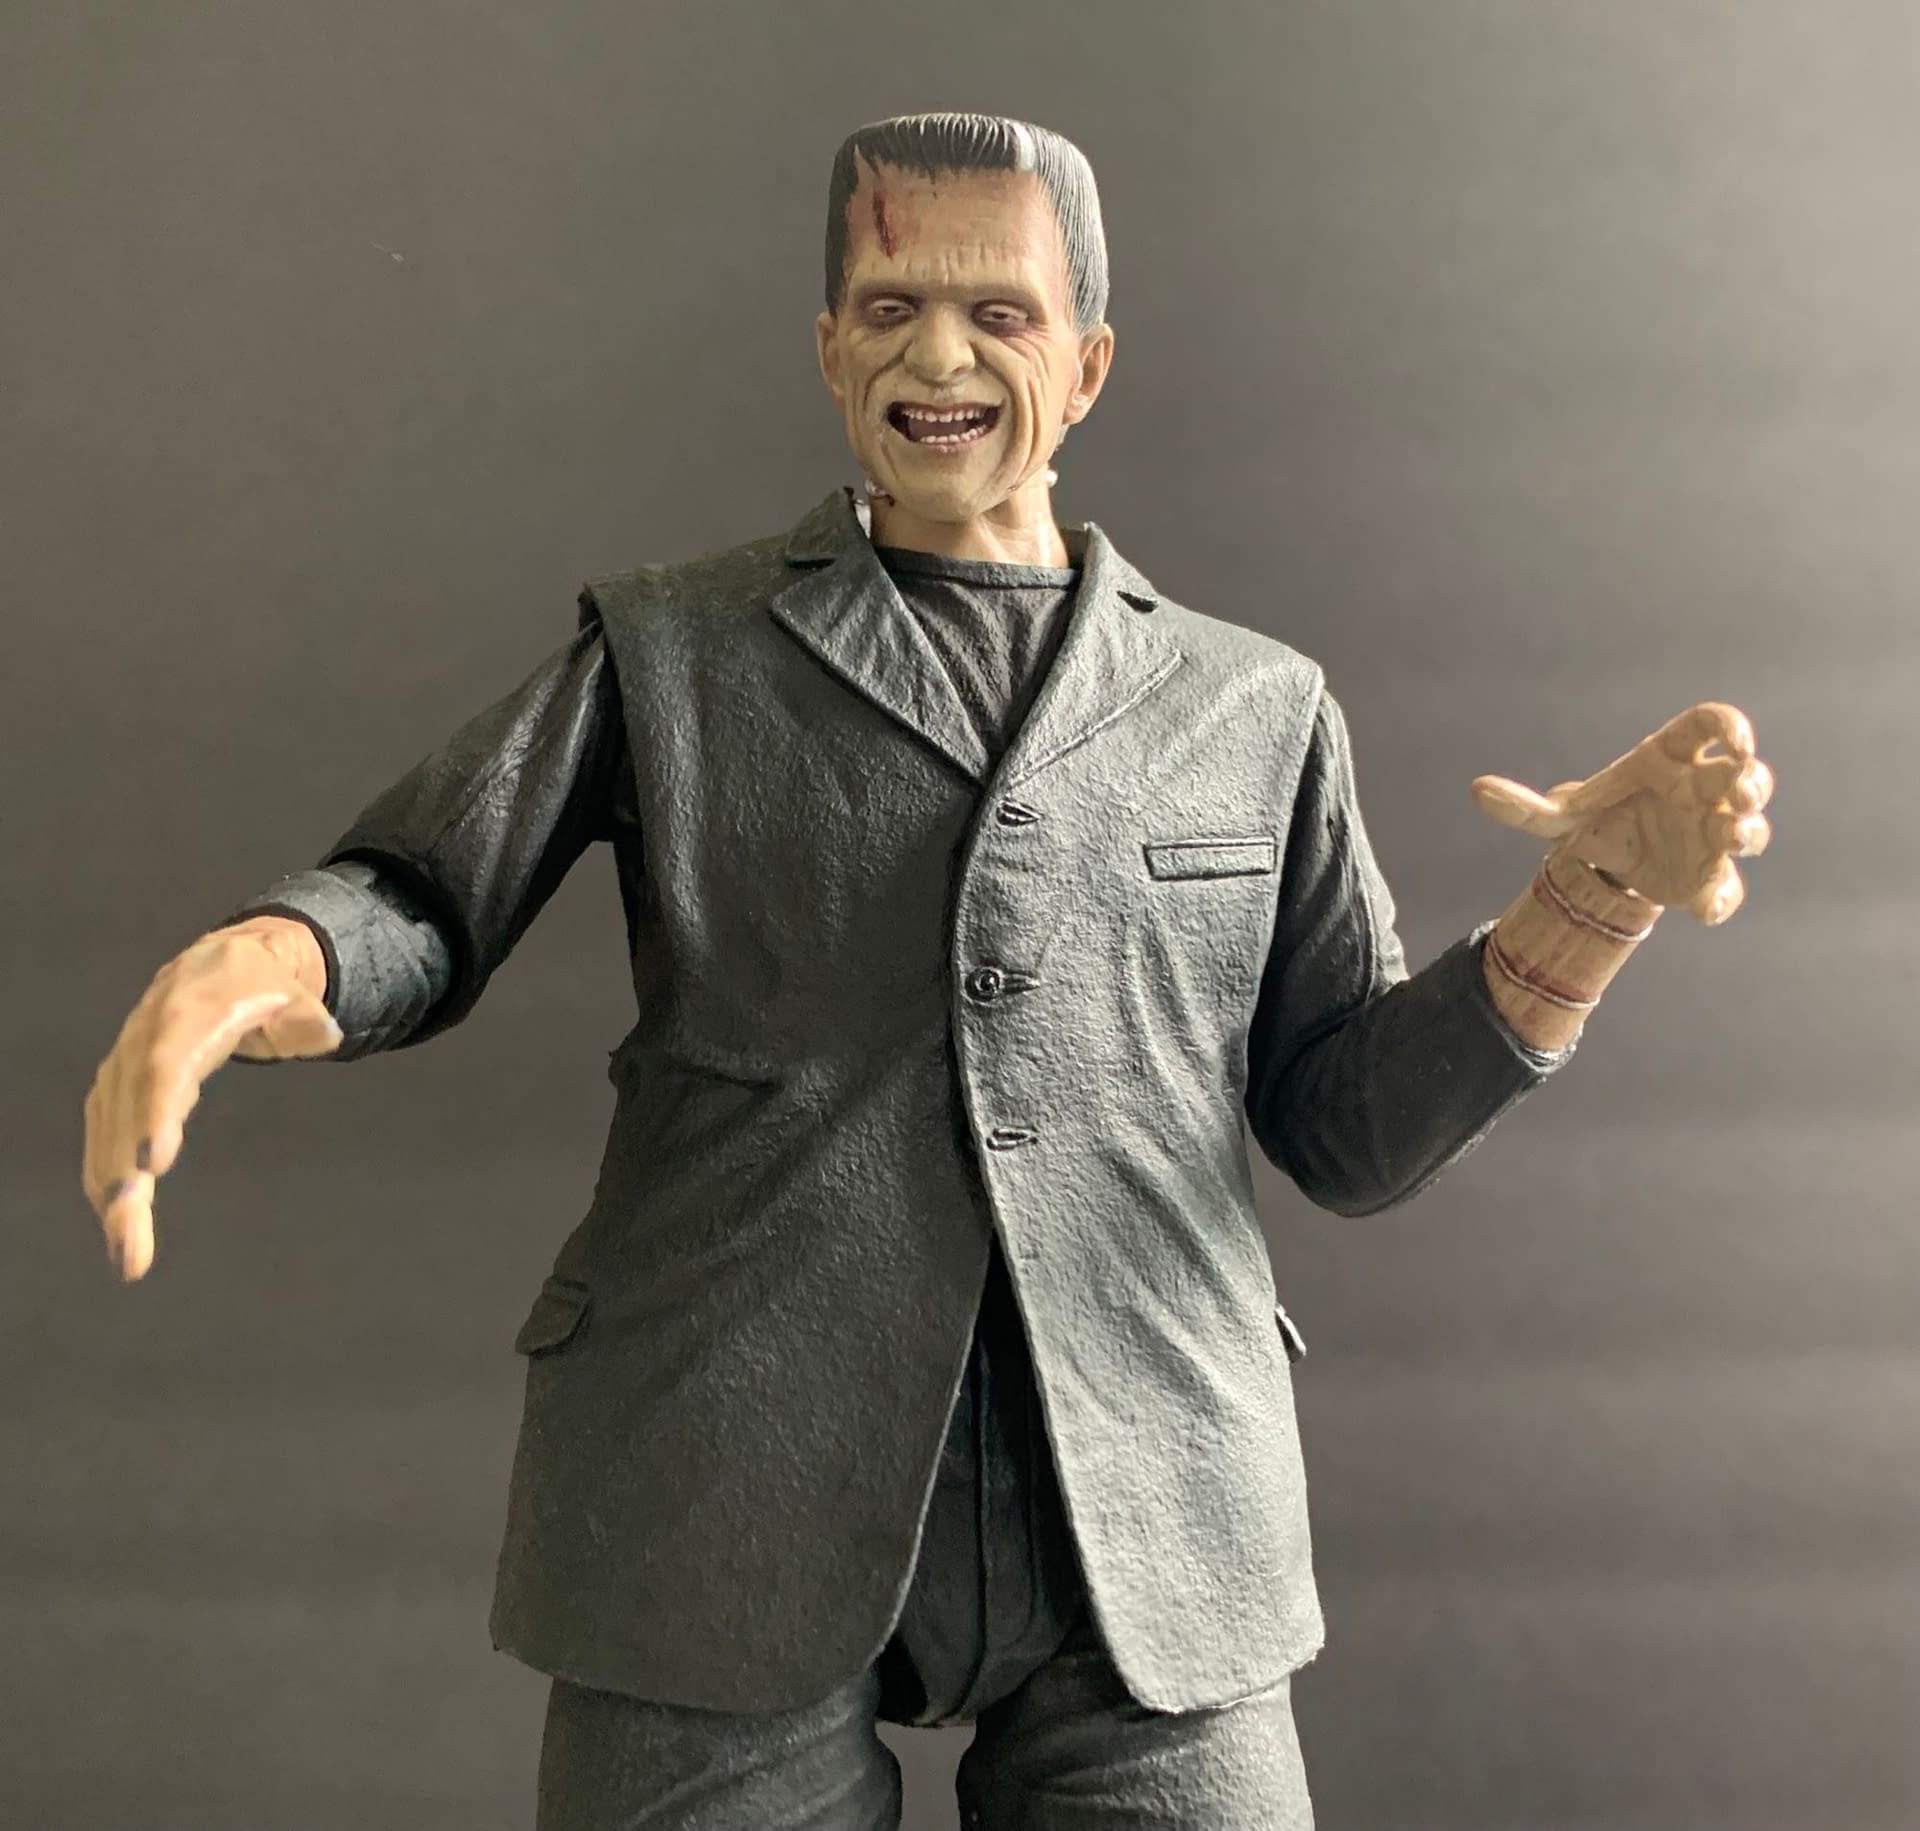 NECA's Universal Monsters Frankenstein Figure May Be Best Of The Year